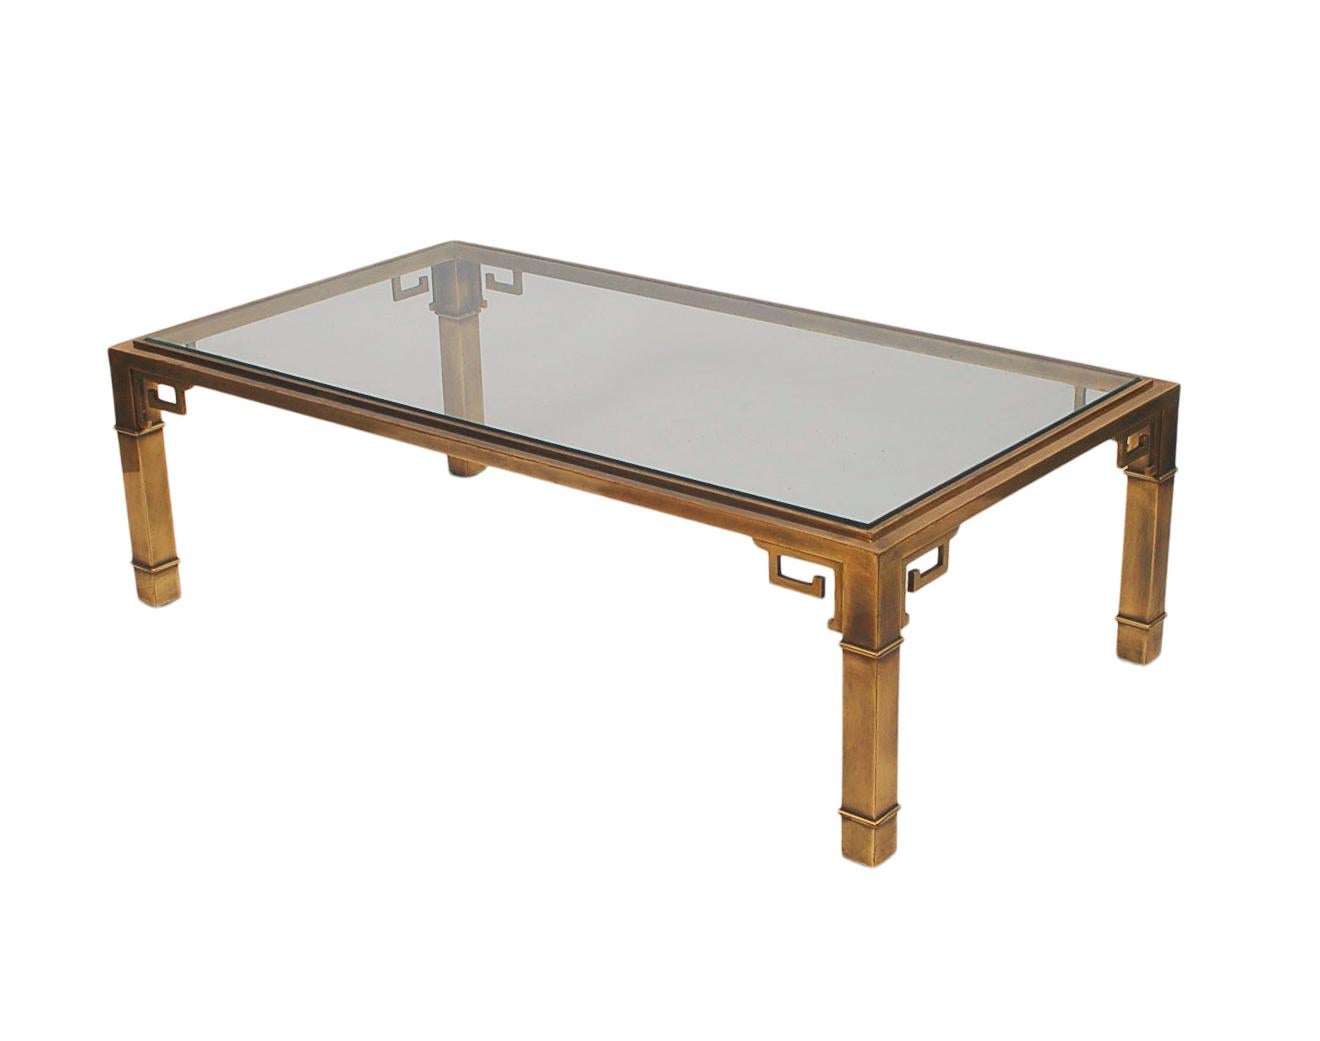 Mid-Century Modern classic with and Asian flair. This large rectangular coffee table features a brass frame with clear inlayed glass.